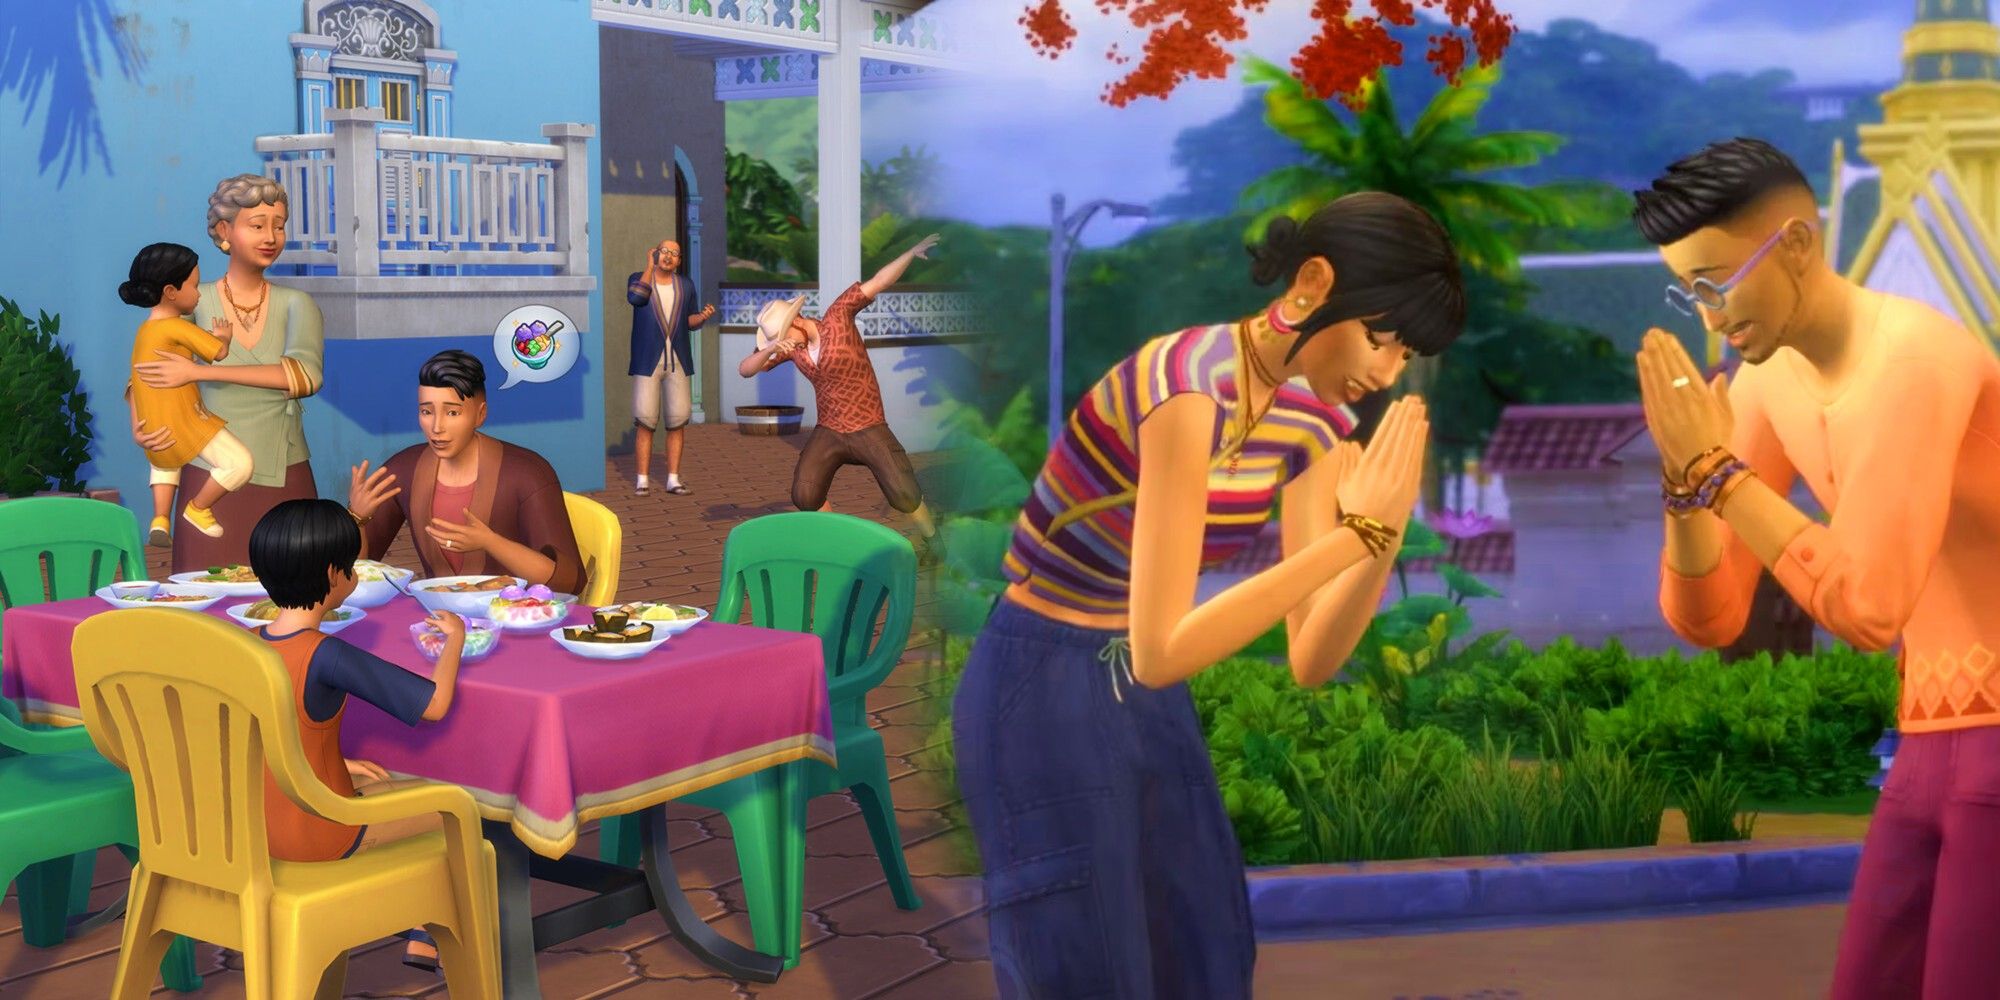 The Sims 4 Is About To Get A Highly-Requested DLC, According To Accidental Leak